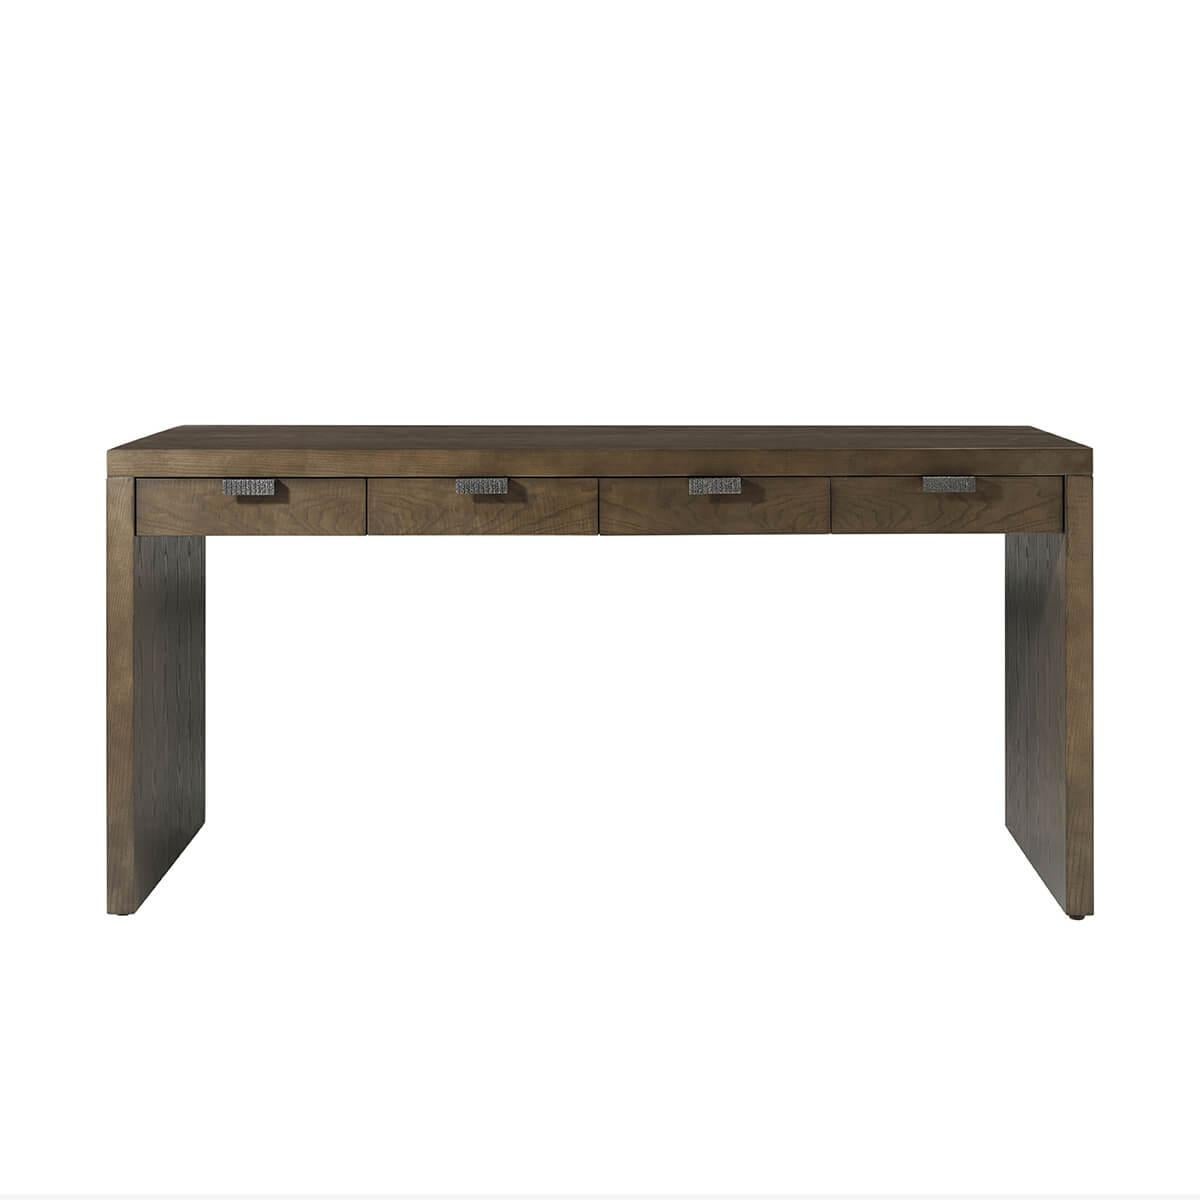 The desk makes a statement with its contemporary design and unique personality. Its metal pulls in an Ember finish and figured cathedral ash construction add elegance and set it apart. With stunning artful grain patterns and ample storage in four